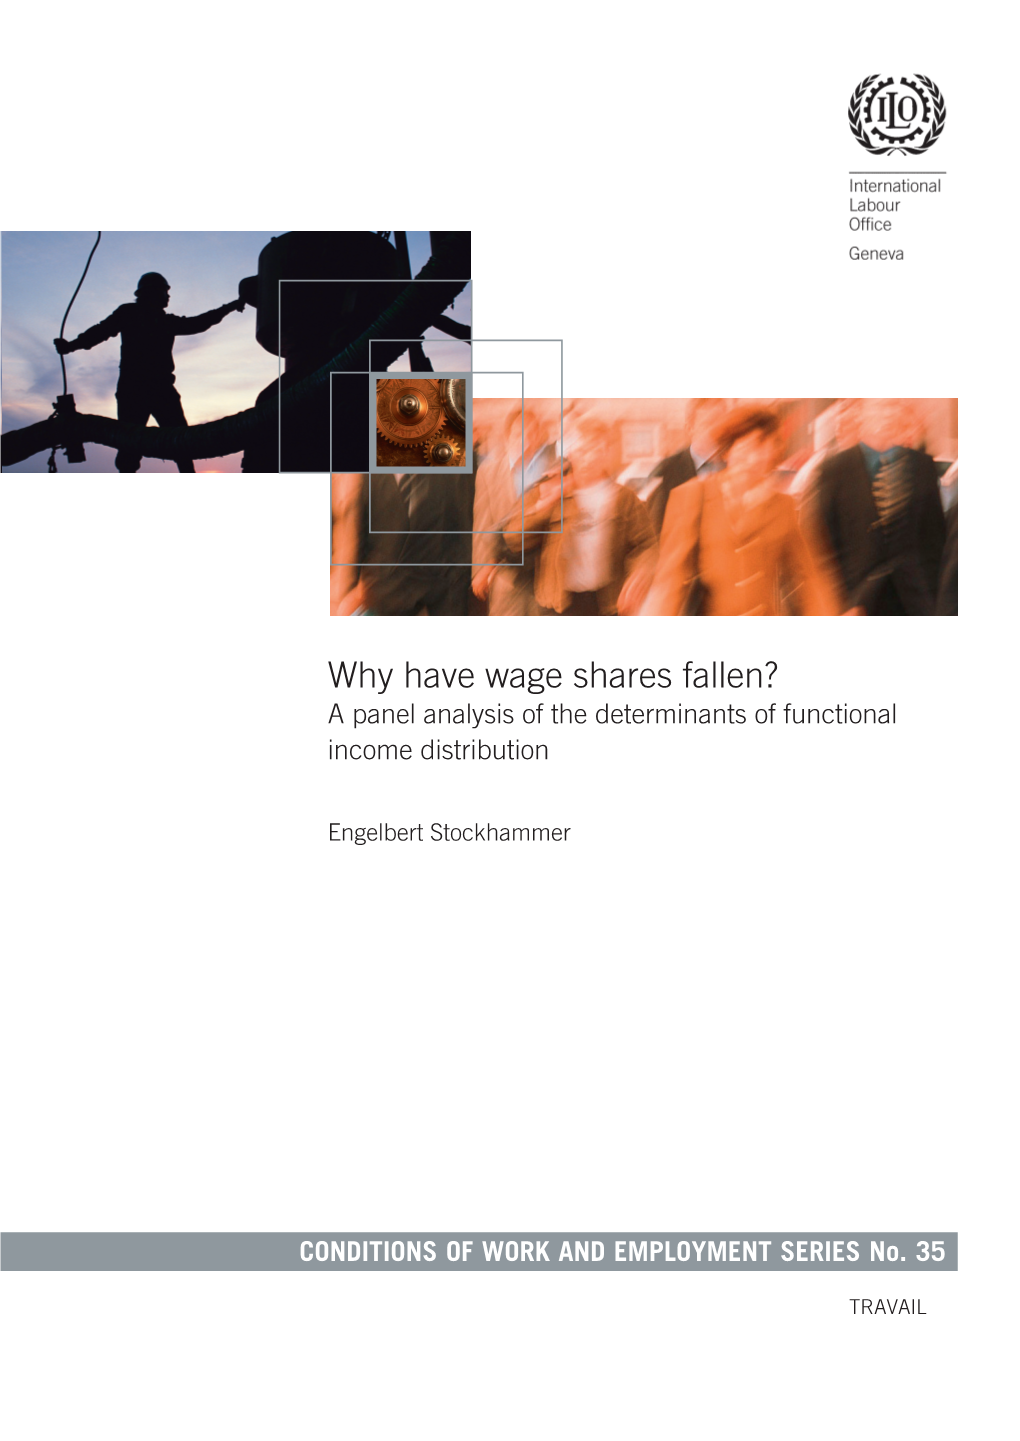 Why Have Wage Shares Fallen?